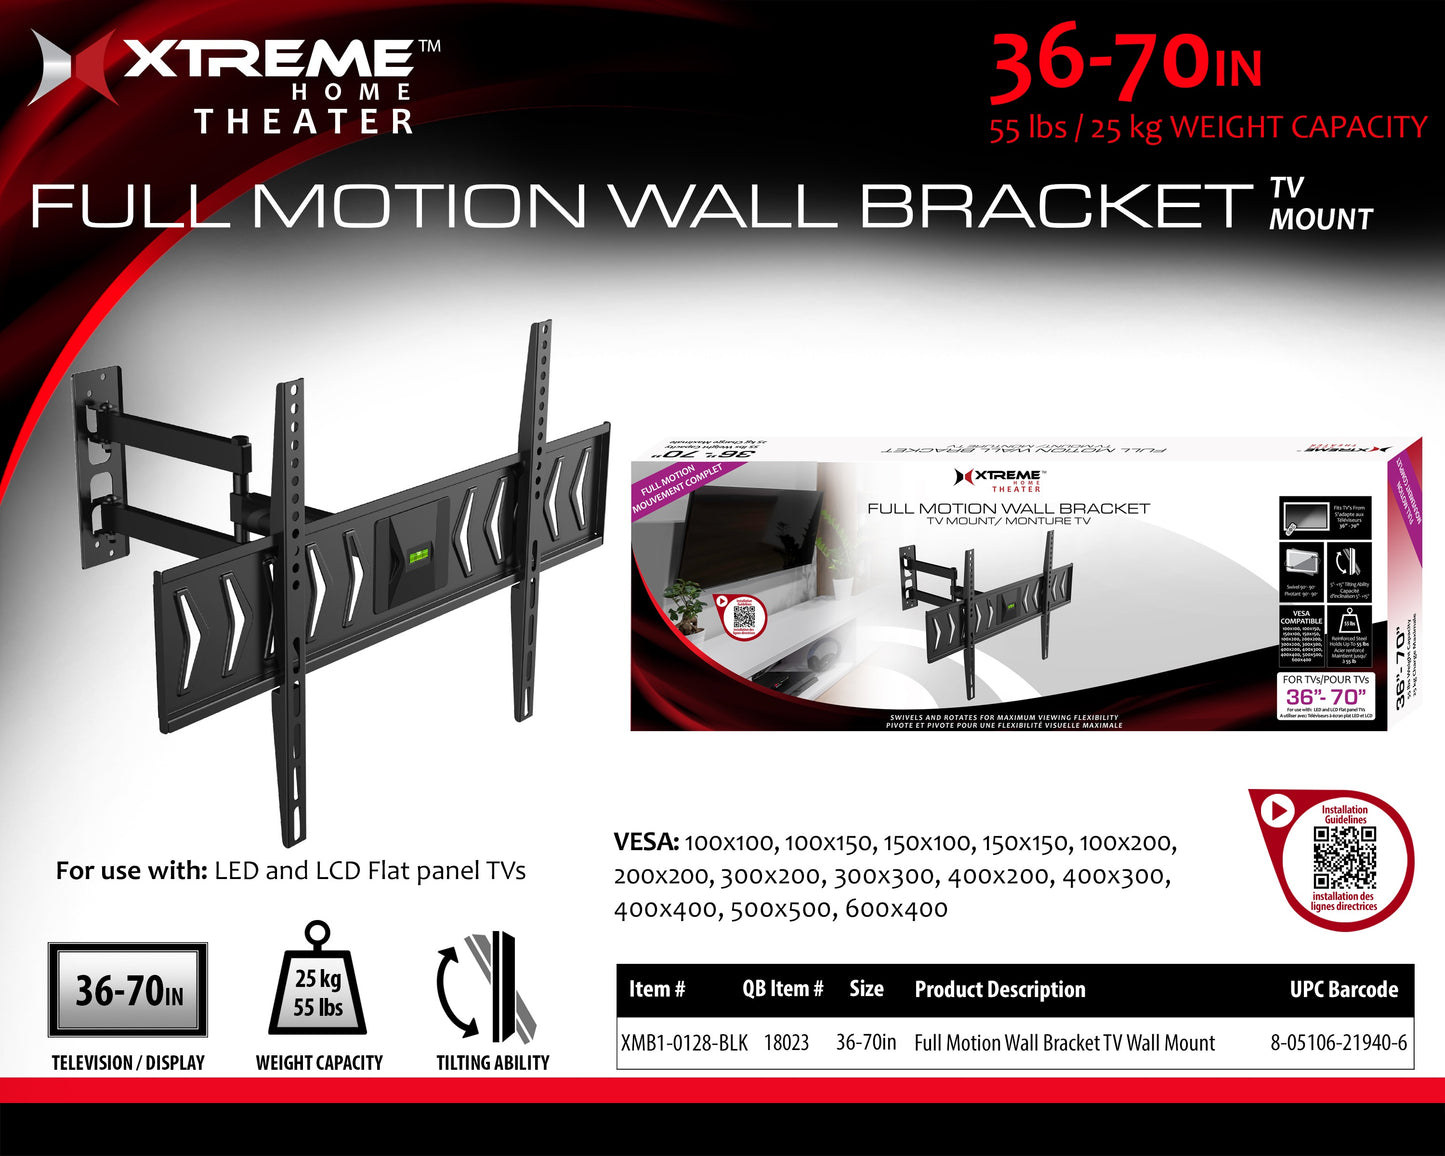 Xtreme Full Motion Wall Bracket TV Mount, 36in - 70in